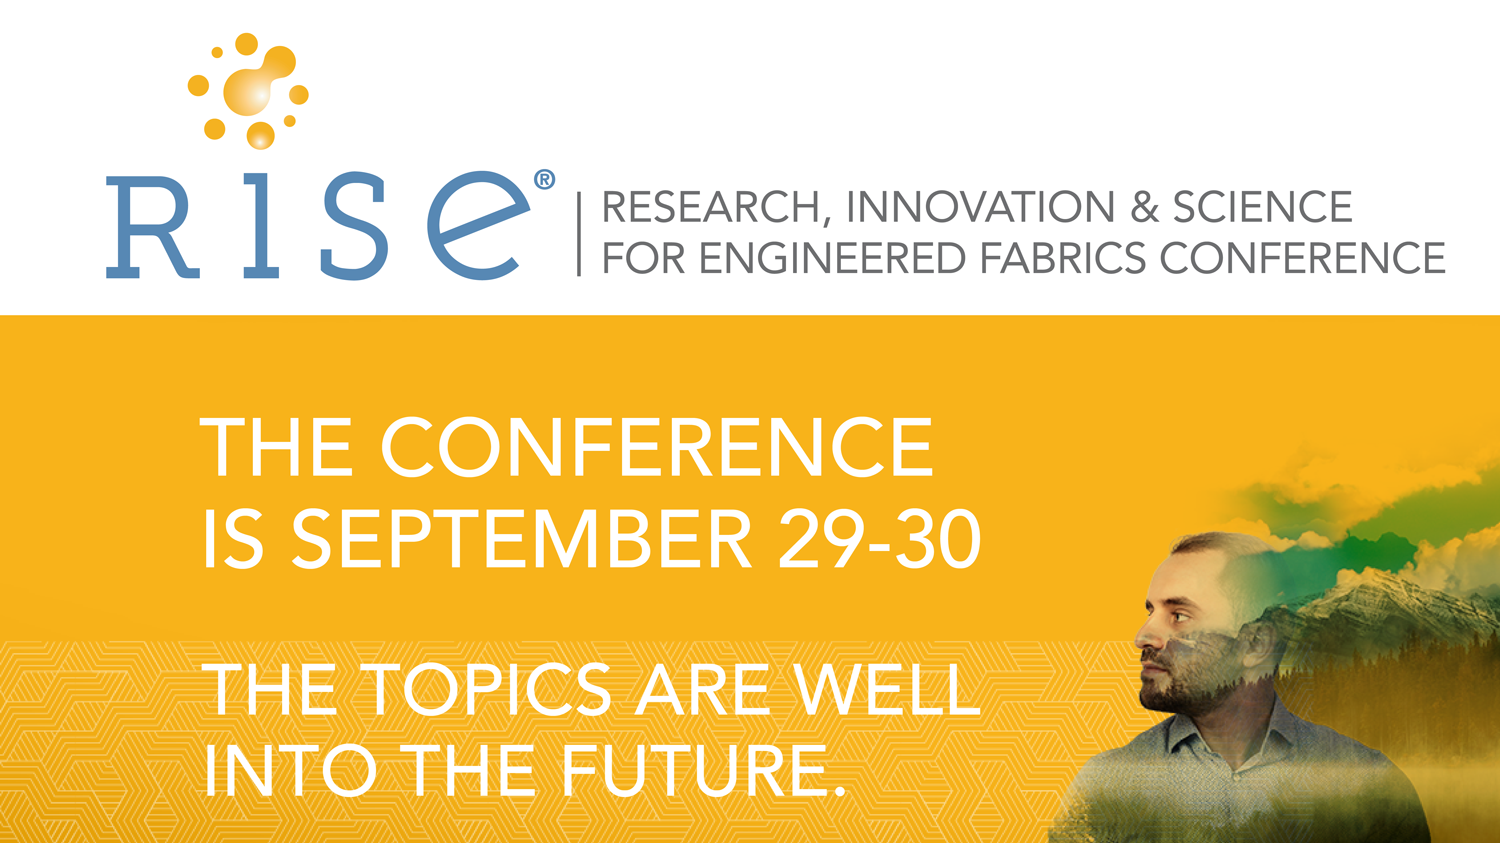 Highlights of the RISE conference include sustainability developments in polymers, fibres and additives,.